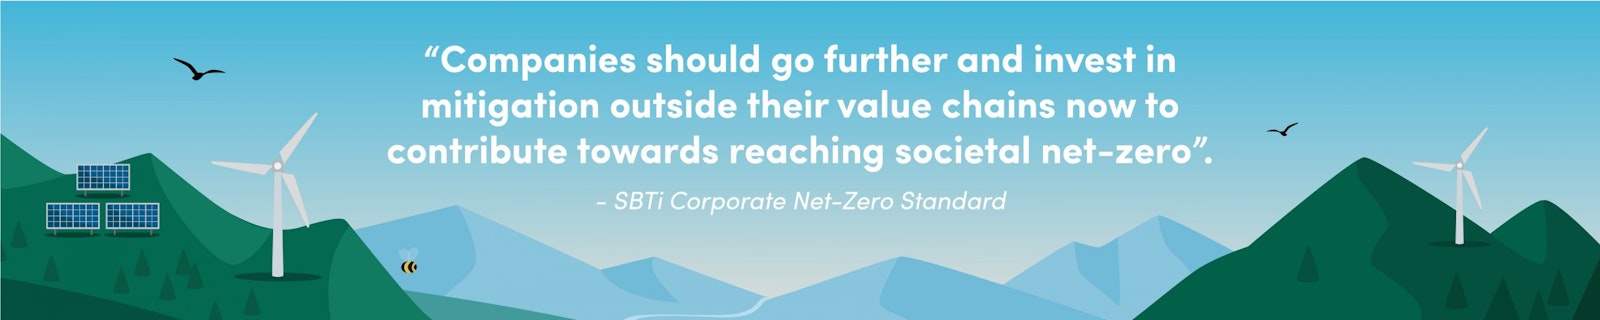 "Companies should go further and invest in mitigation outside their value chains now to contribute towards reaching societal net-zero." - SBTi